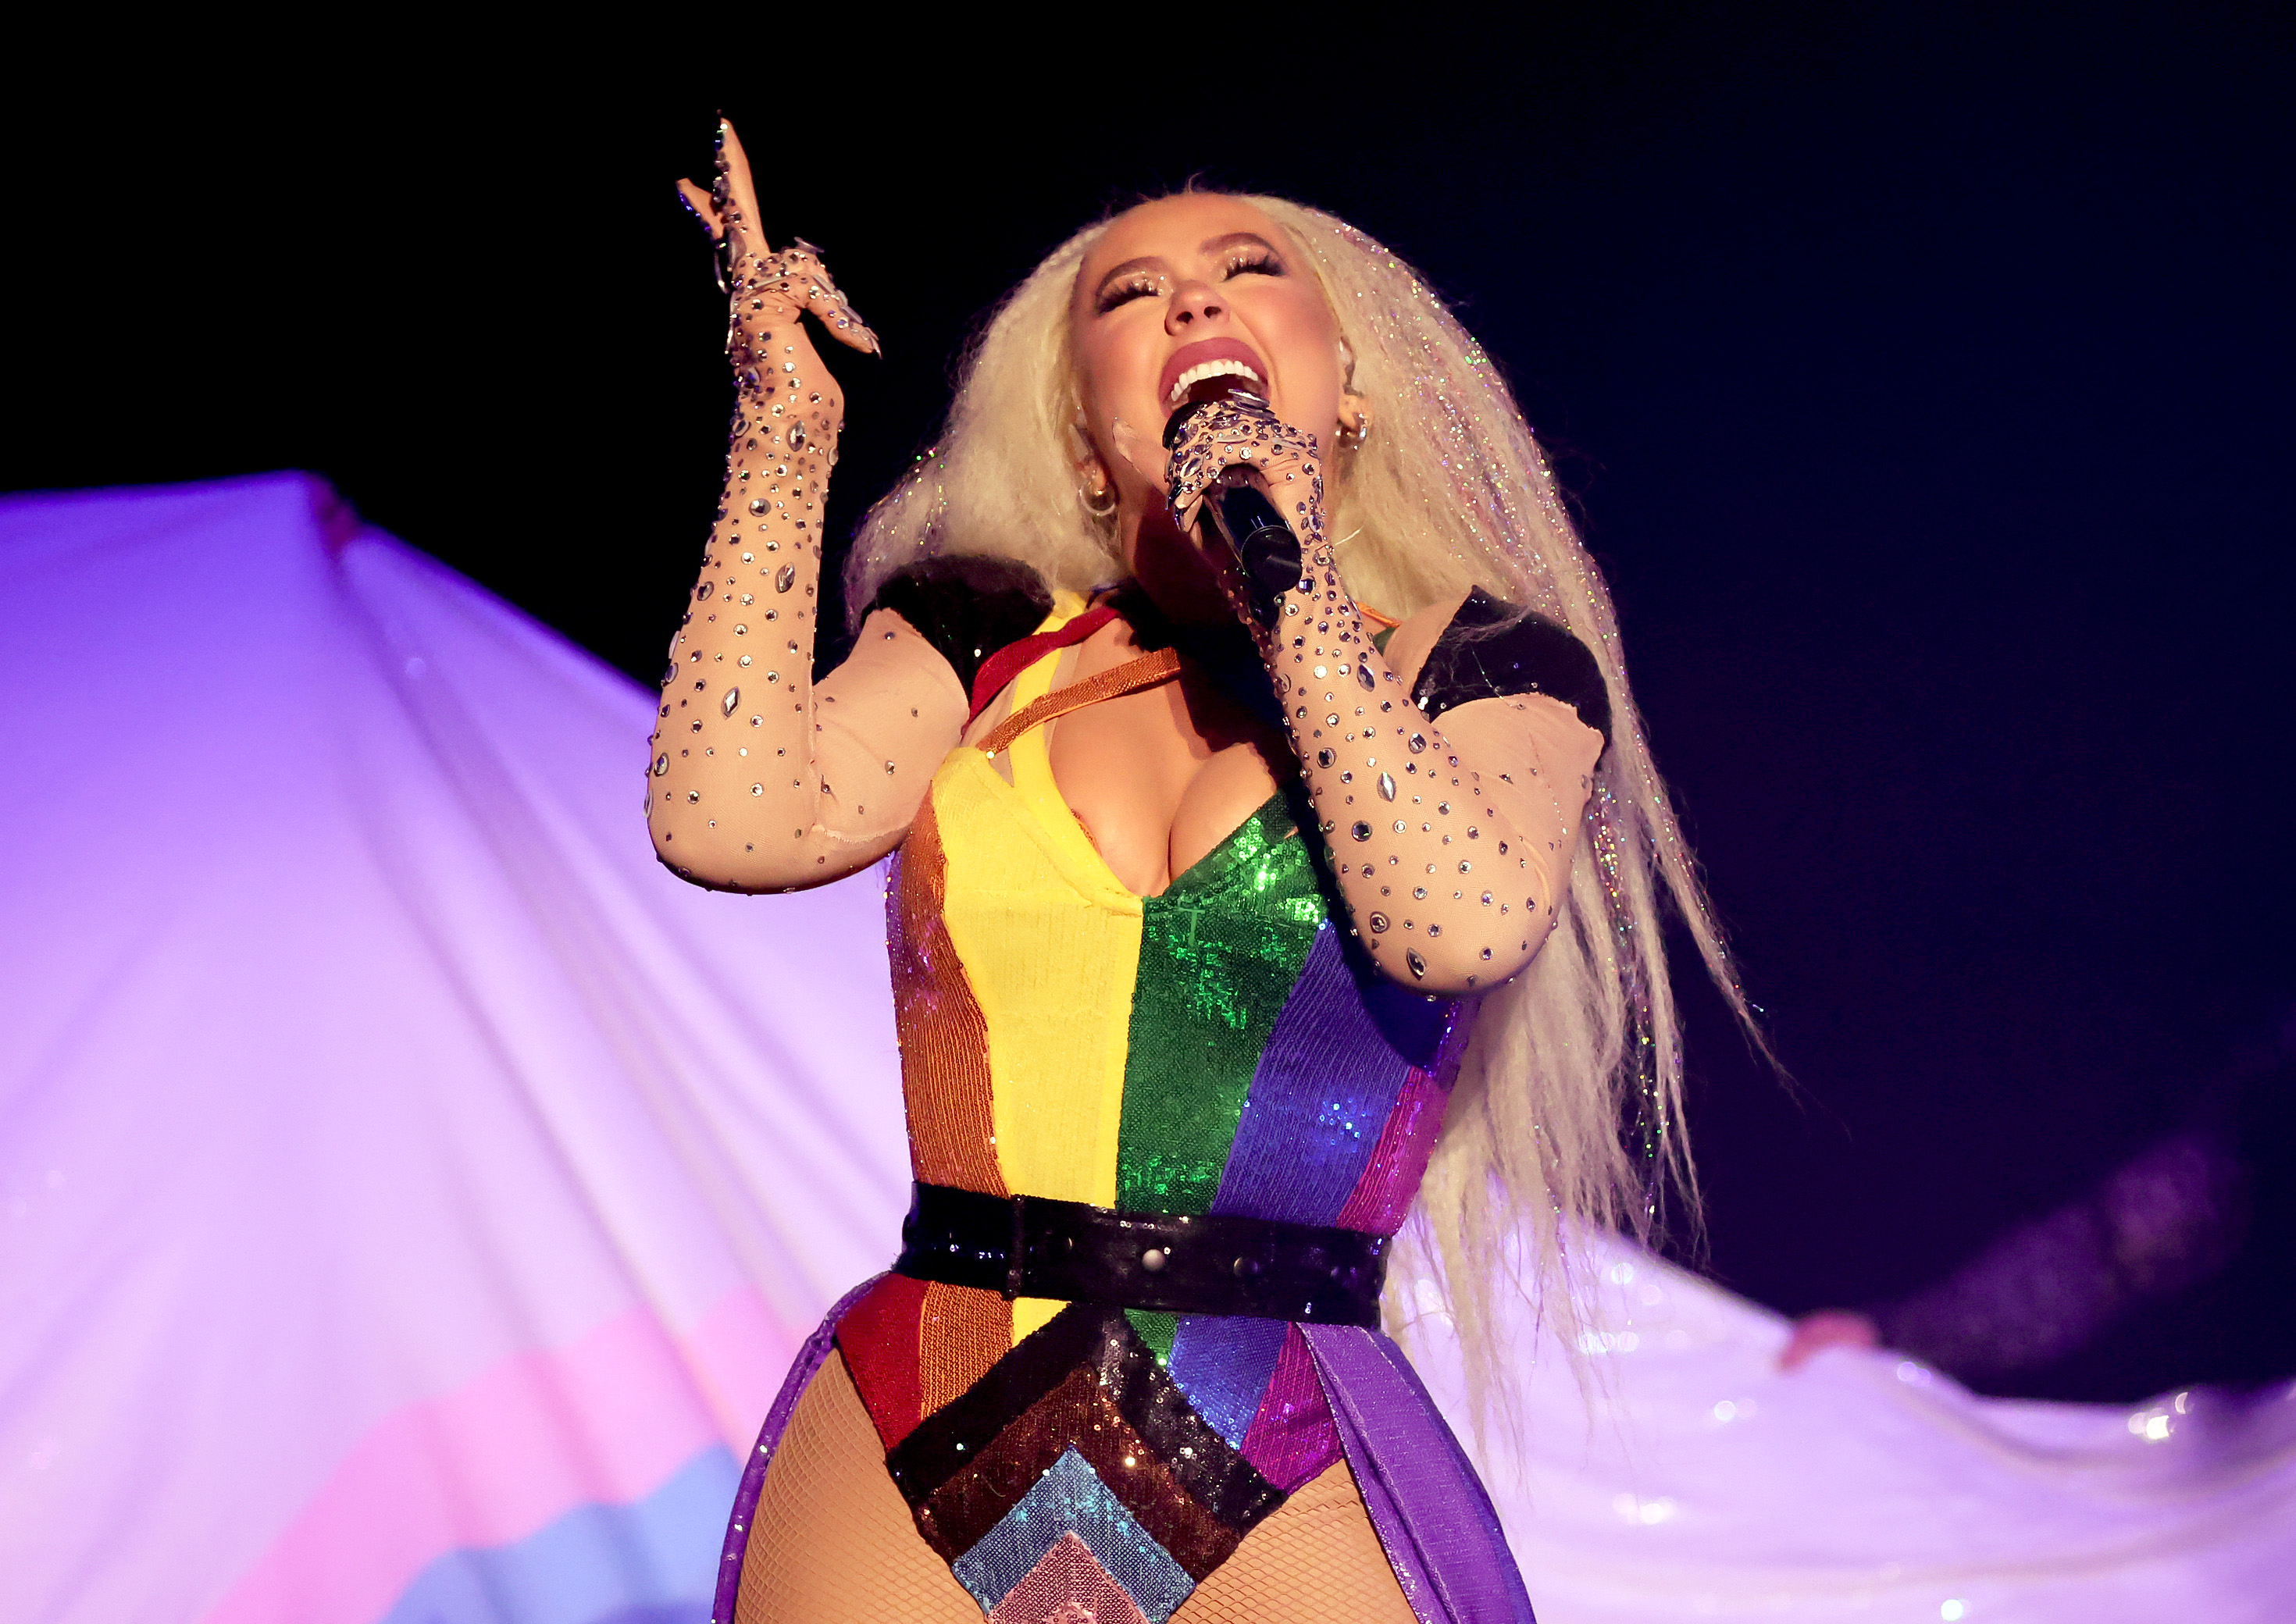 Christina Aguilera performs at the official in-person music event "LA Pride In The Park" at Los Angeles Historical Park on June 11, 2022, in Los Angeles, California. | Source: Getty Images